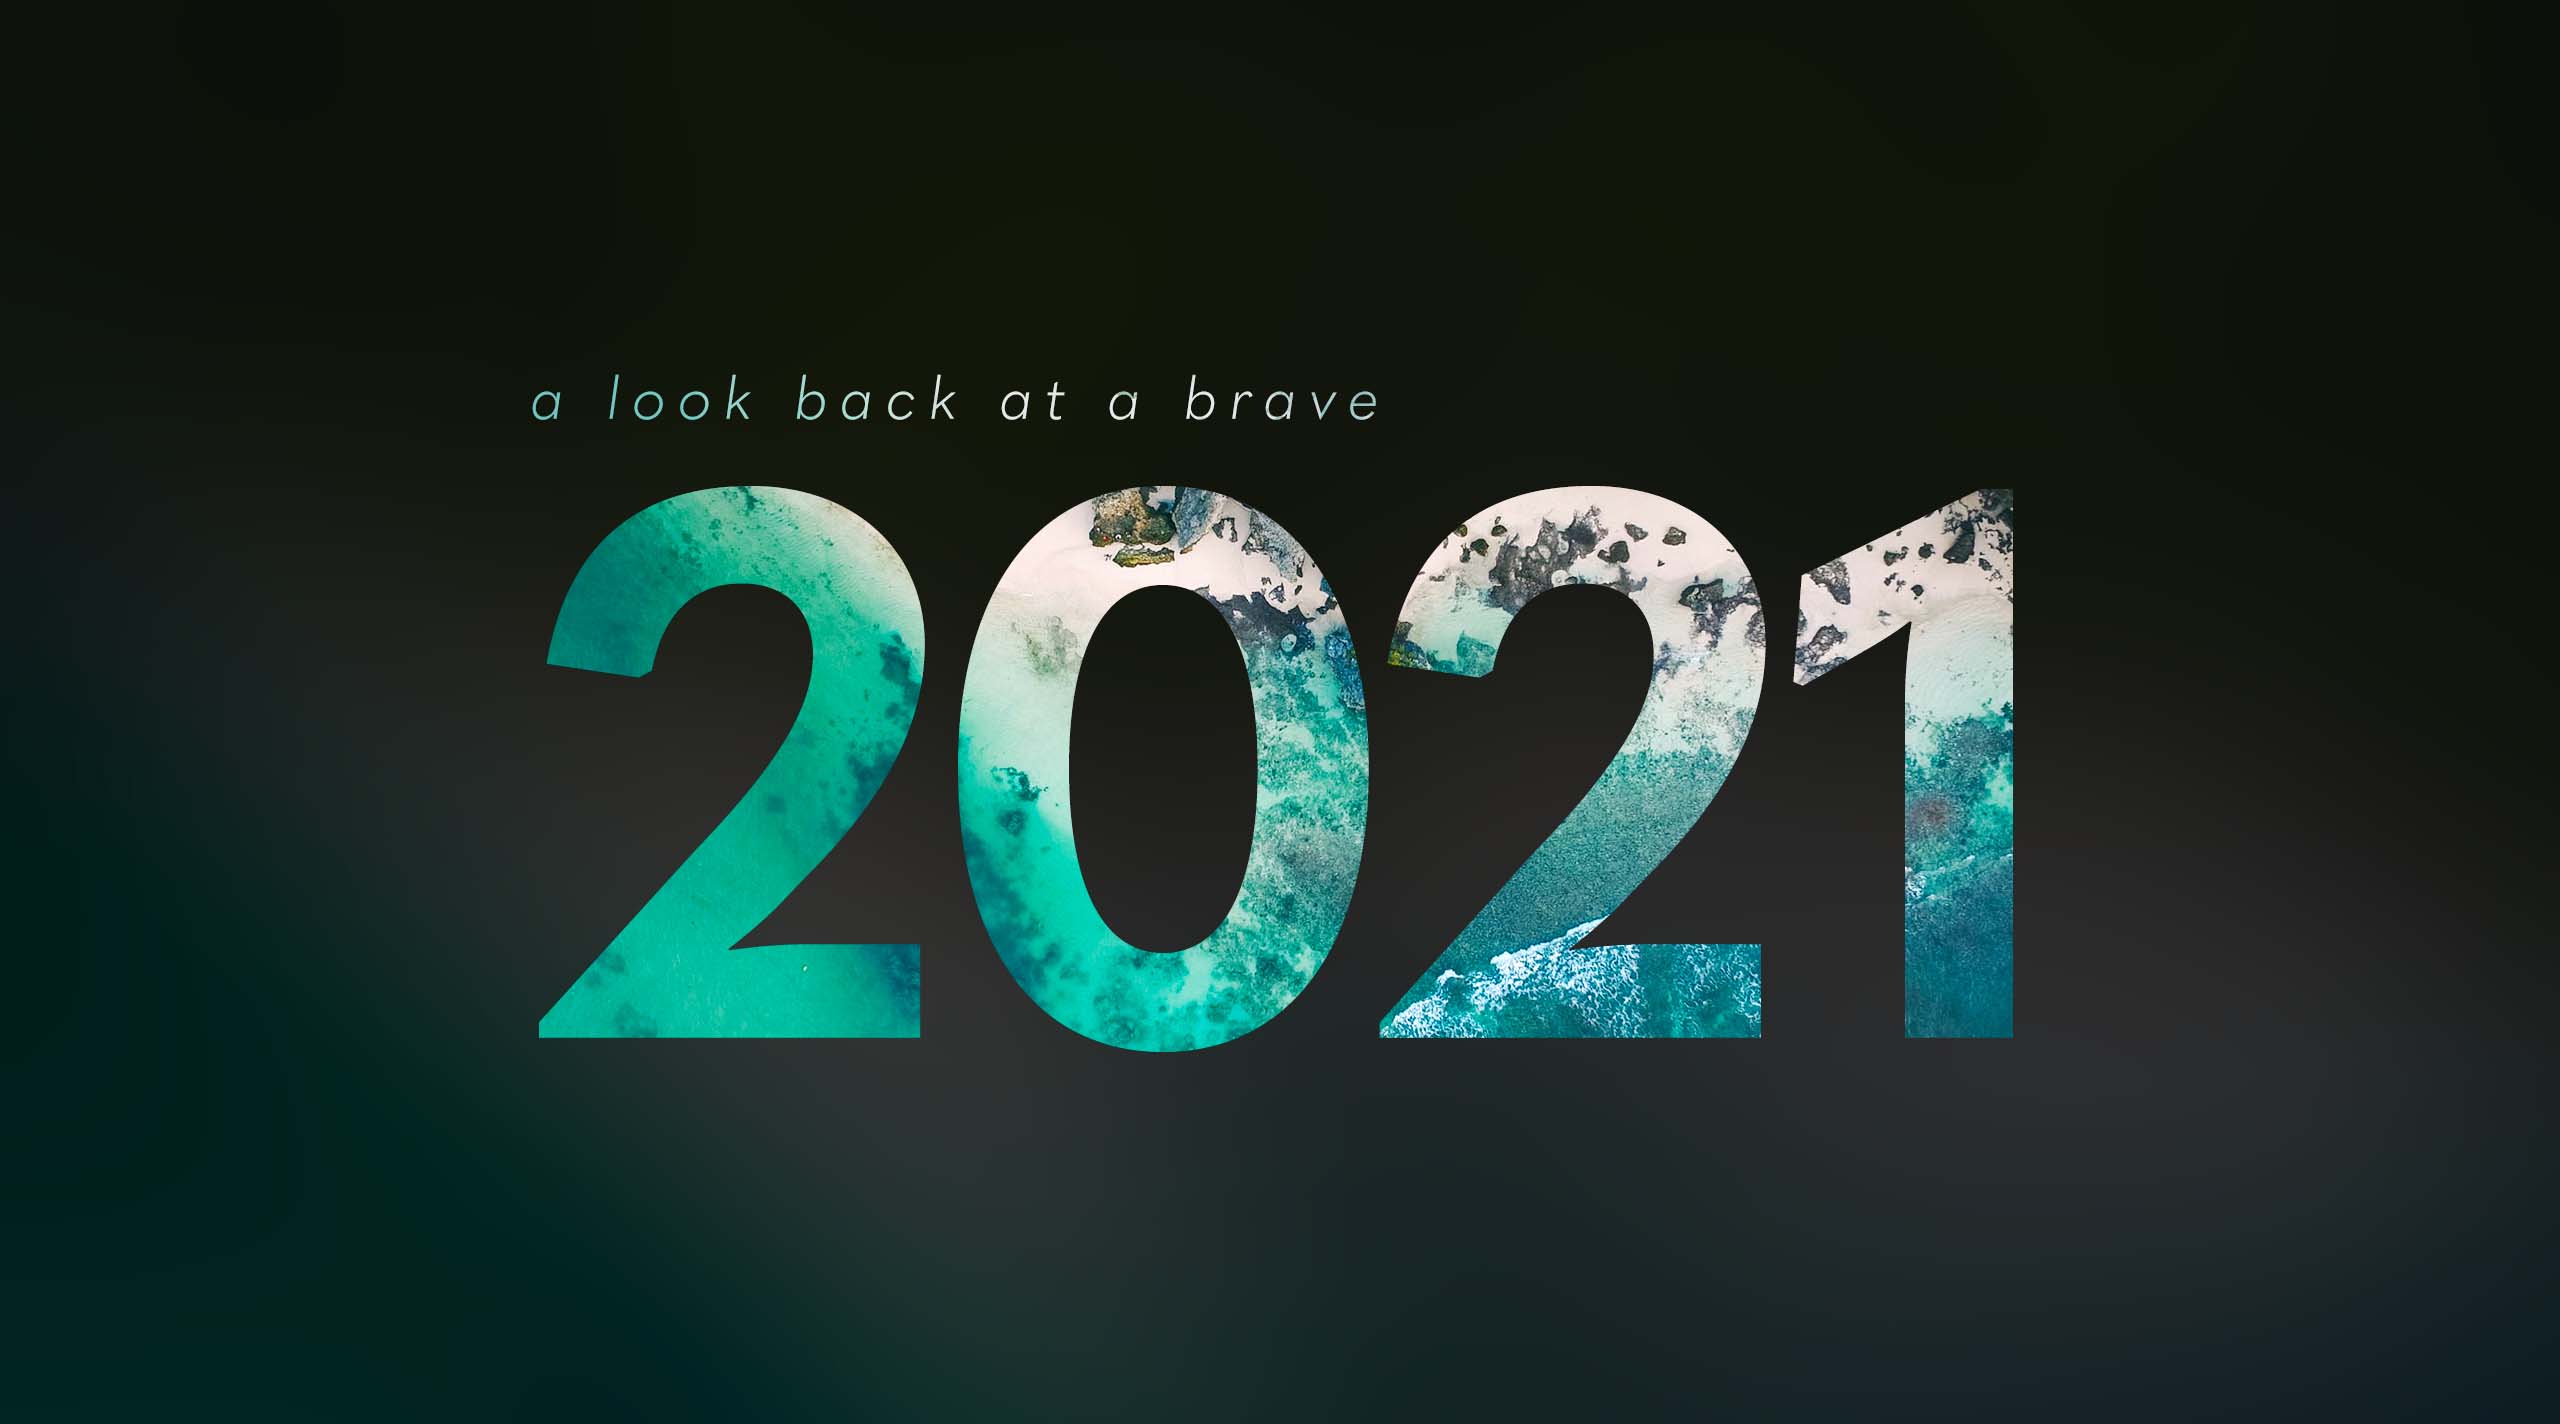 A look back projects on 2021